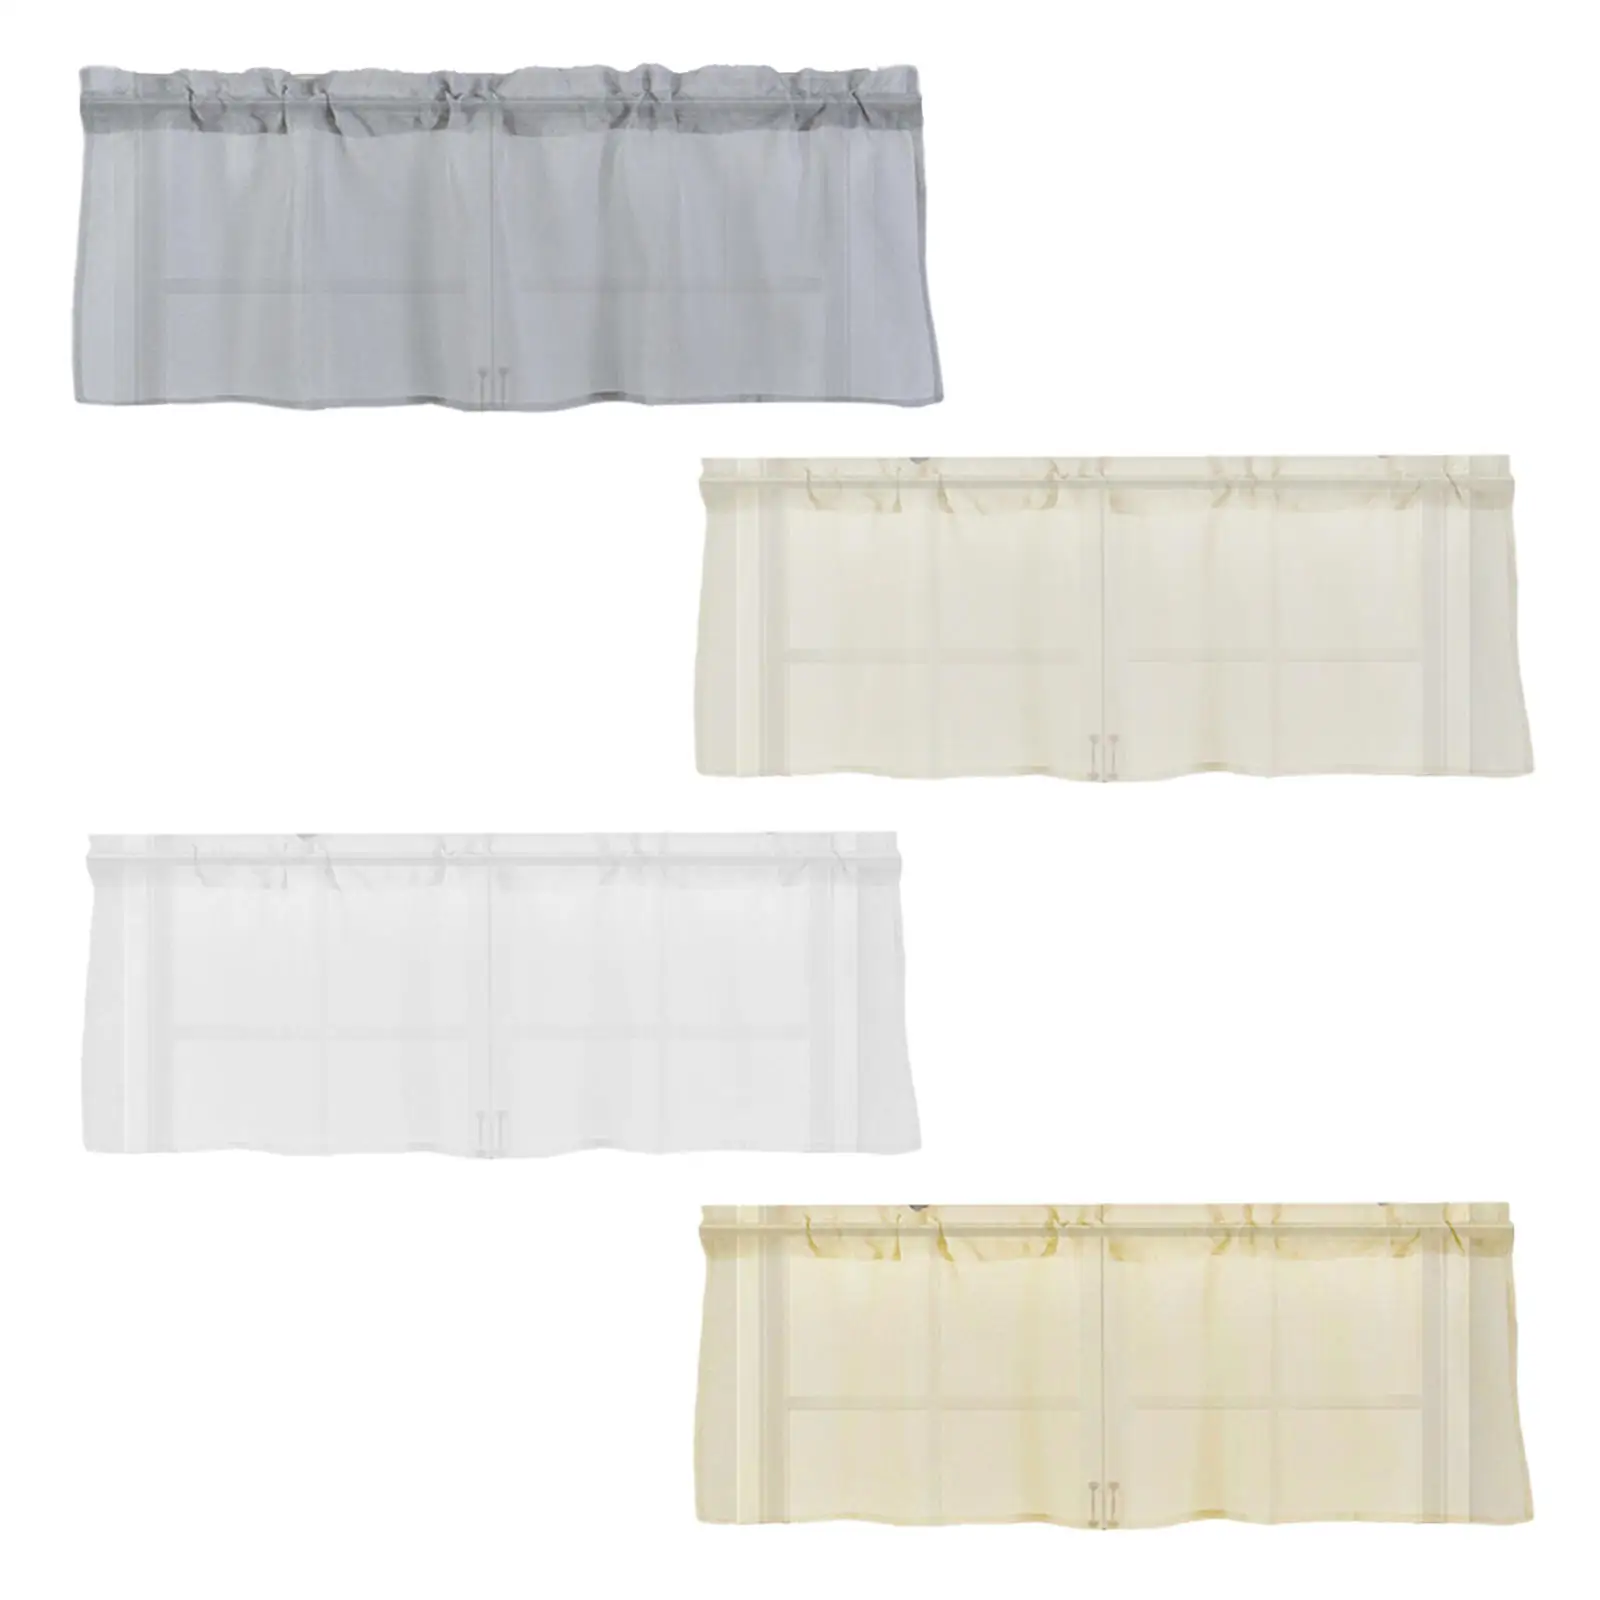 Soft Valances Rod Drapes Polyester for Balconies Bedroom Bathroom